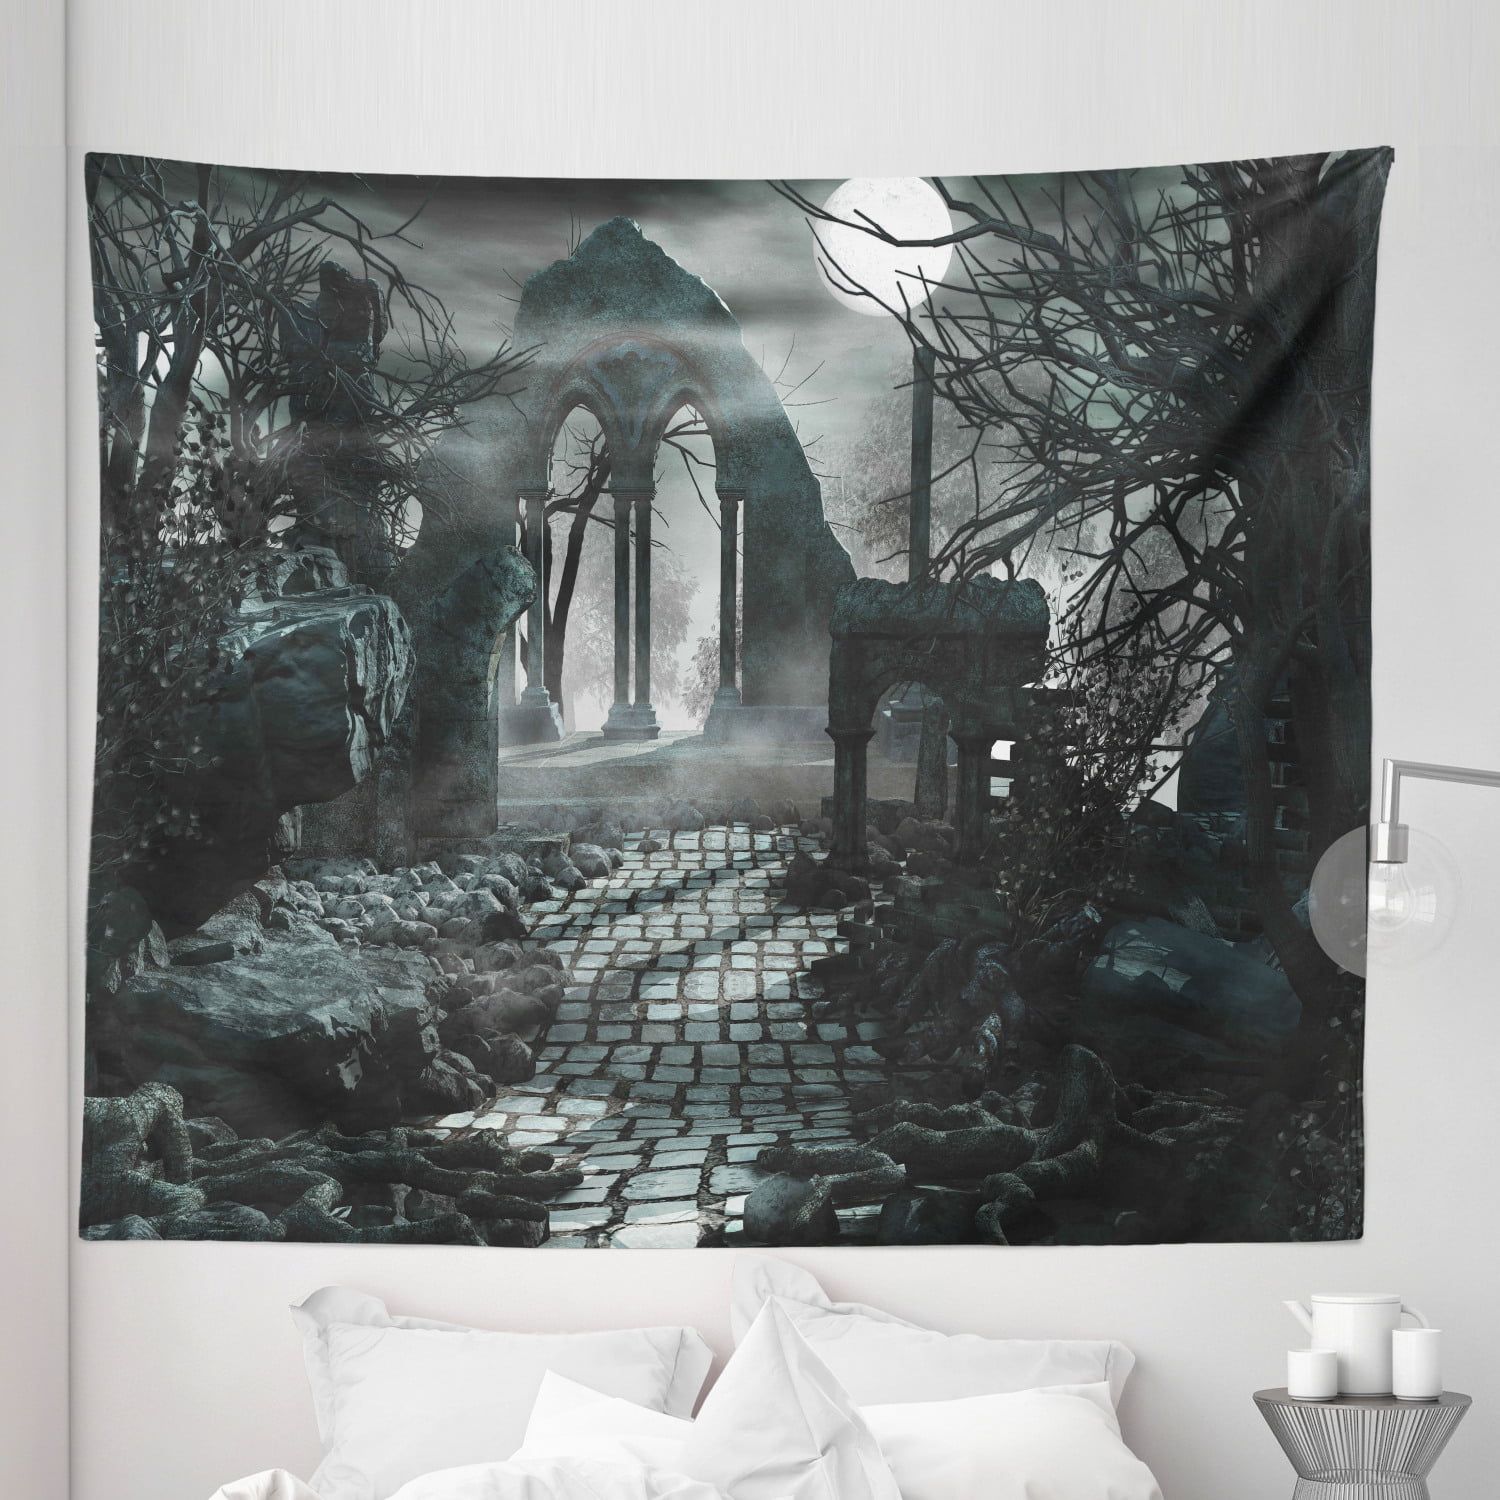 FNAF Tapestry Freddy's Pizzeria Home Decorations Tapestry Wall Hanging 3D Printing Wall Blanket Wall Hanging Poster for Living Room Bedroom Dorm Decor 